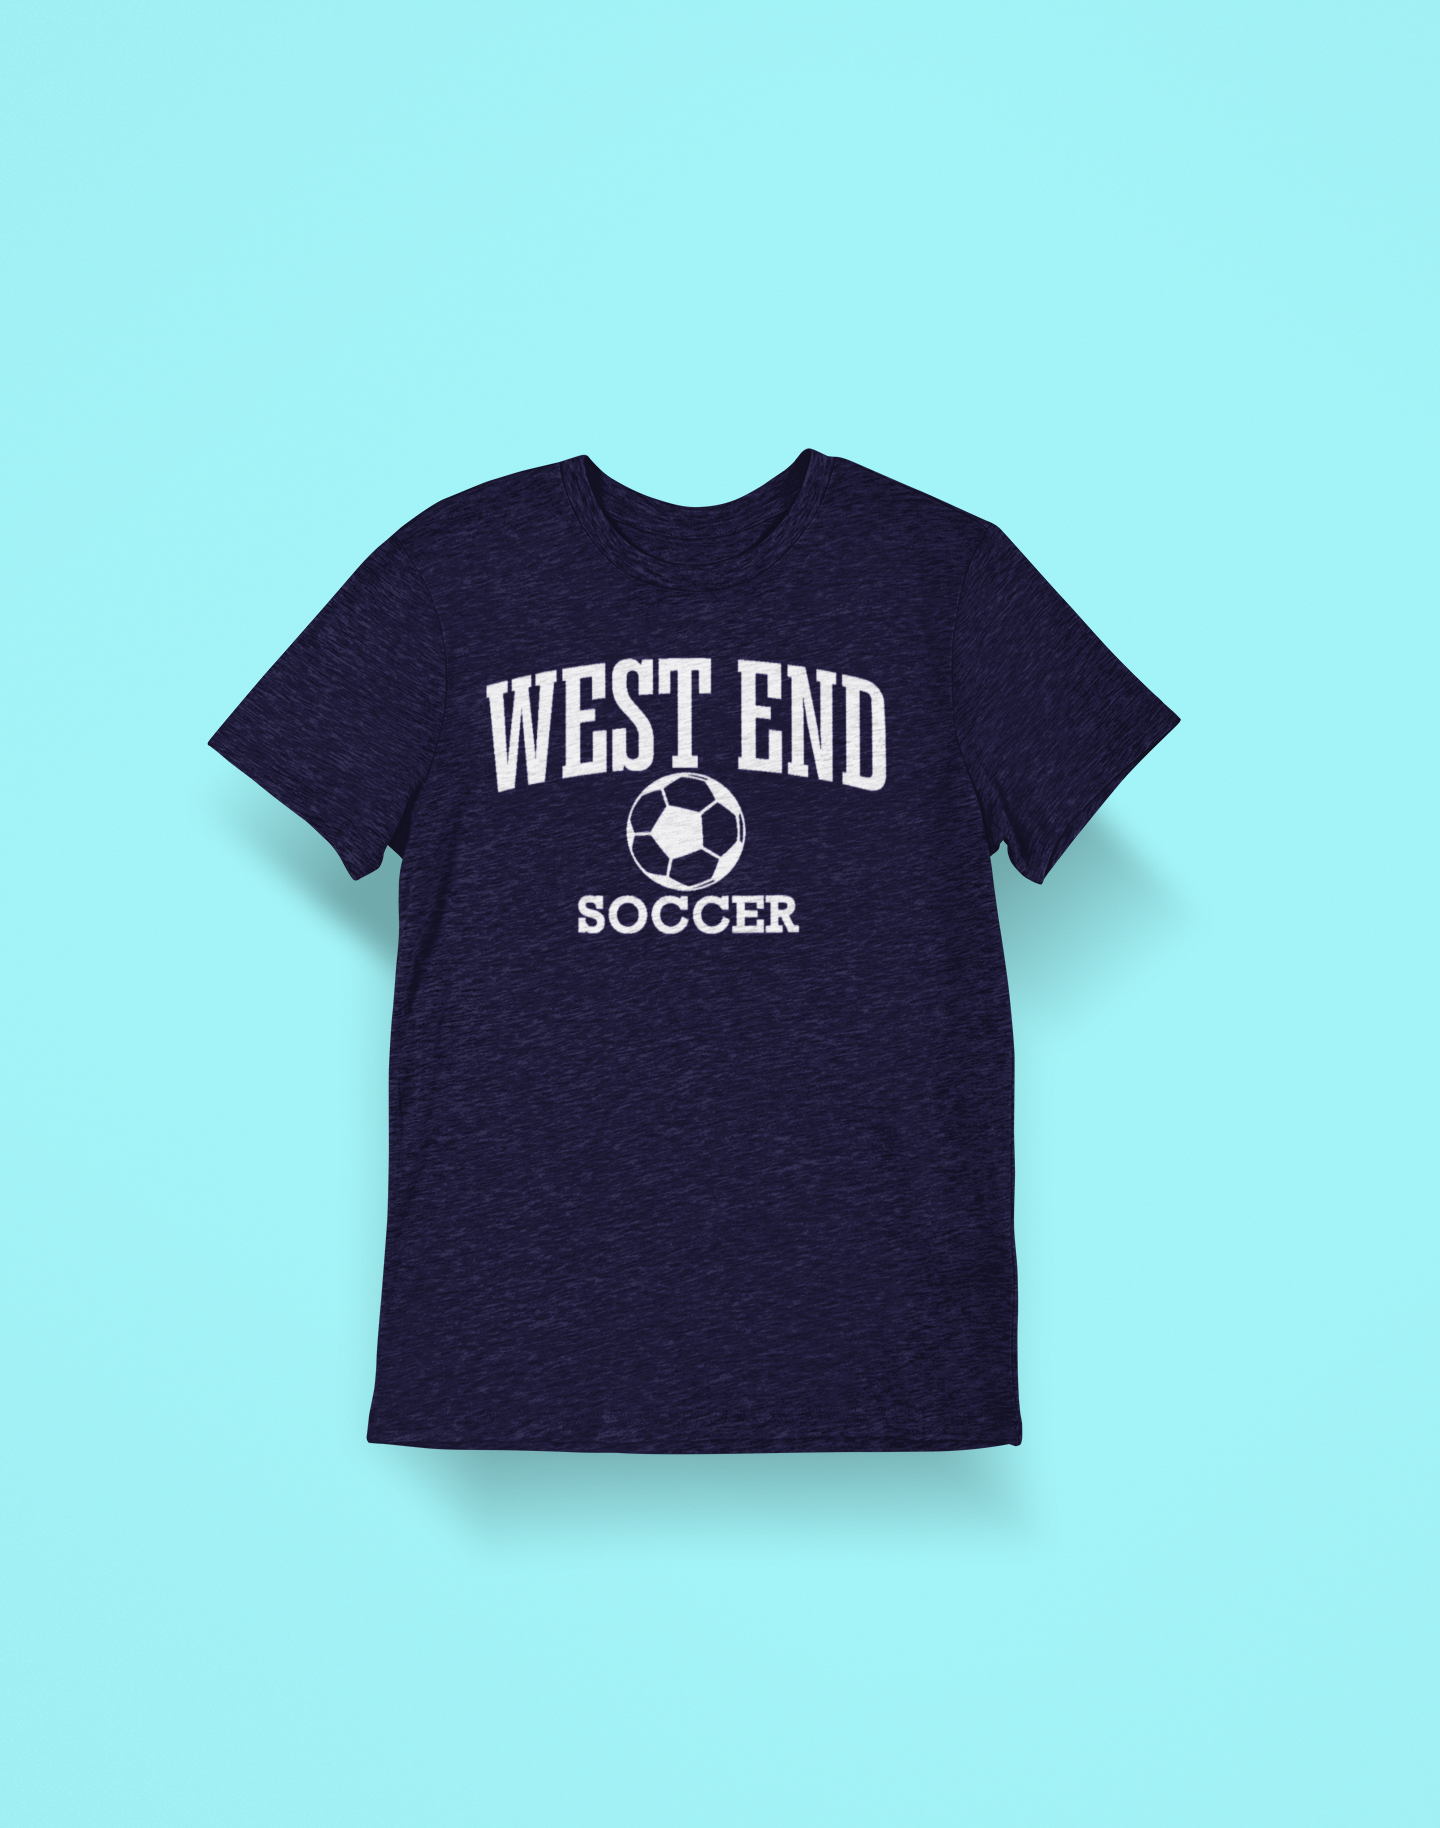 West End Middle Tshirt Soccer